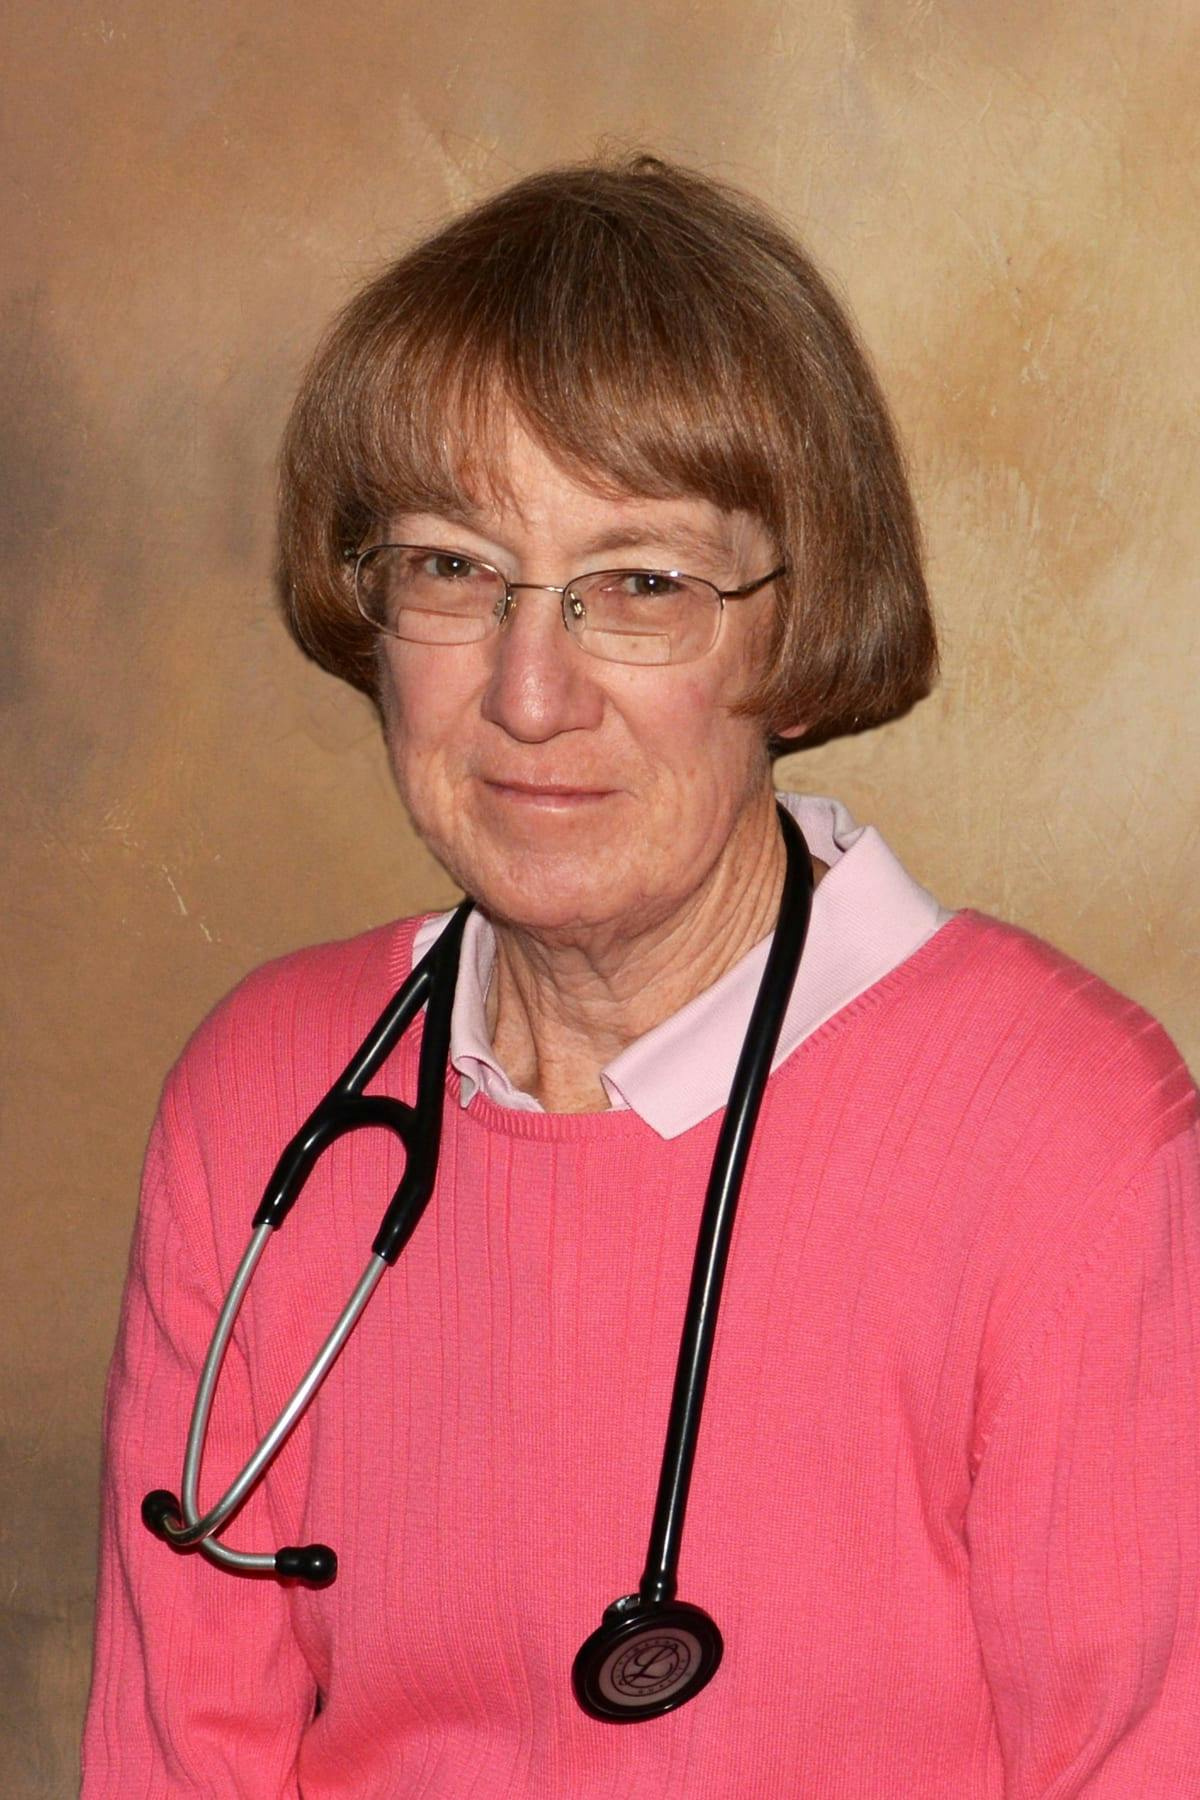 M. Sheila Donnelly, MD

Medical Oncologist

Heywood Oncology & Specialty Clinics

Heywood Hospital

Gardner, MA